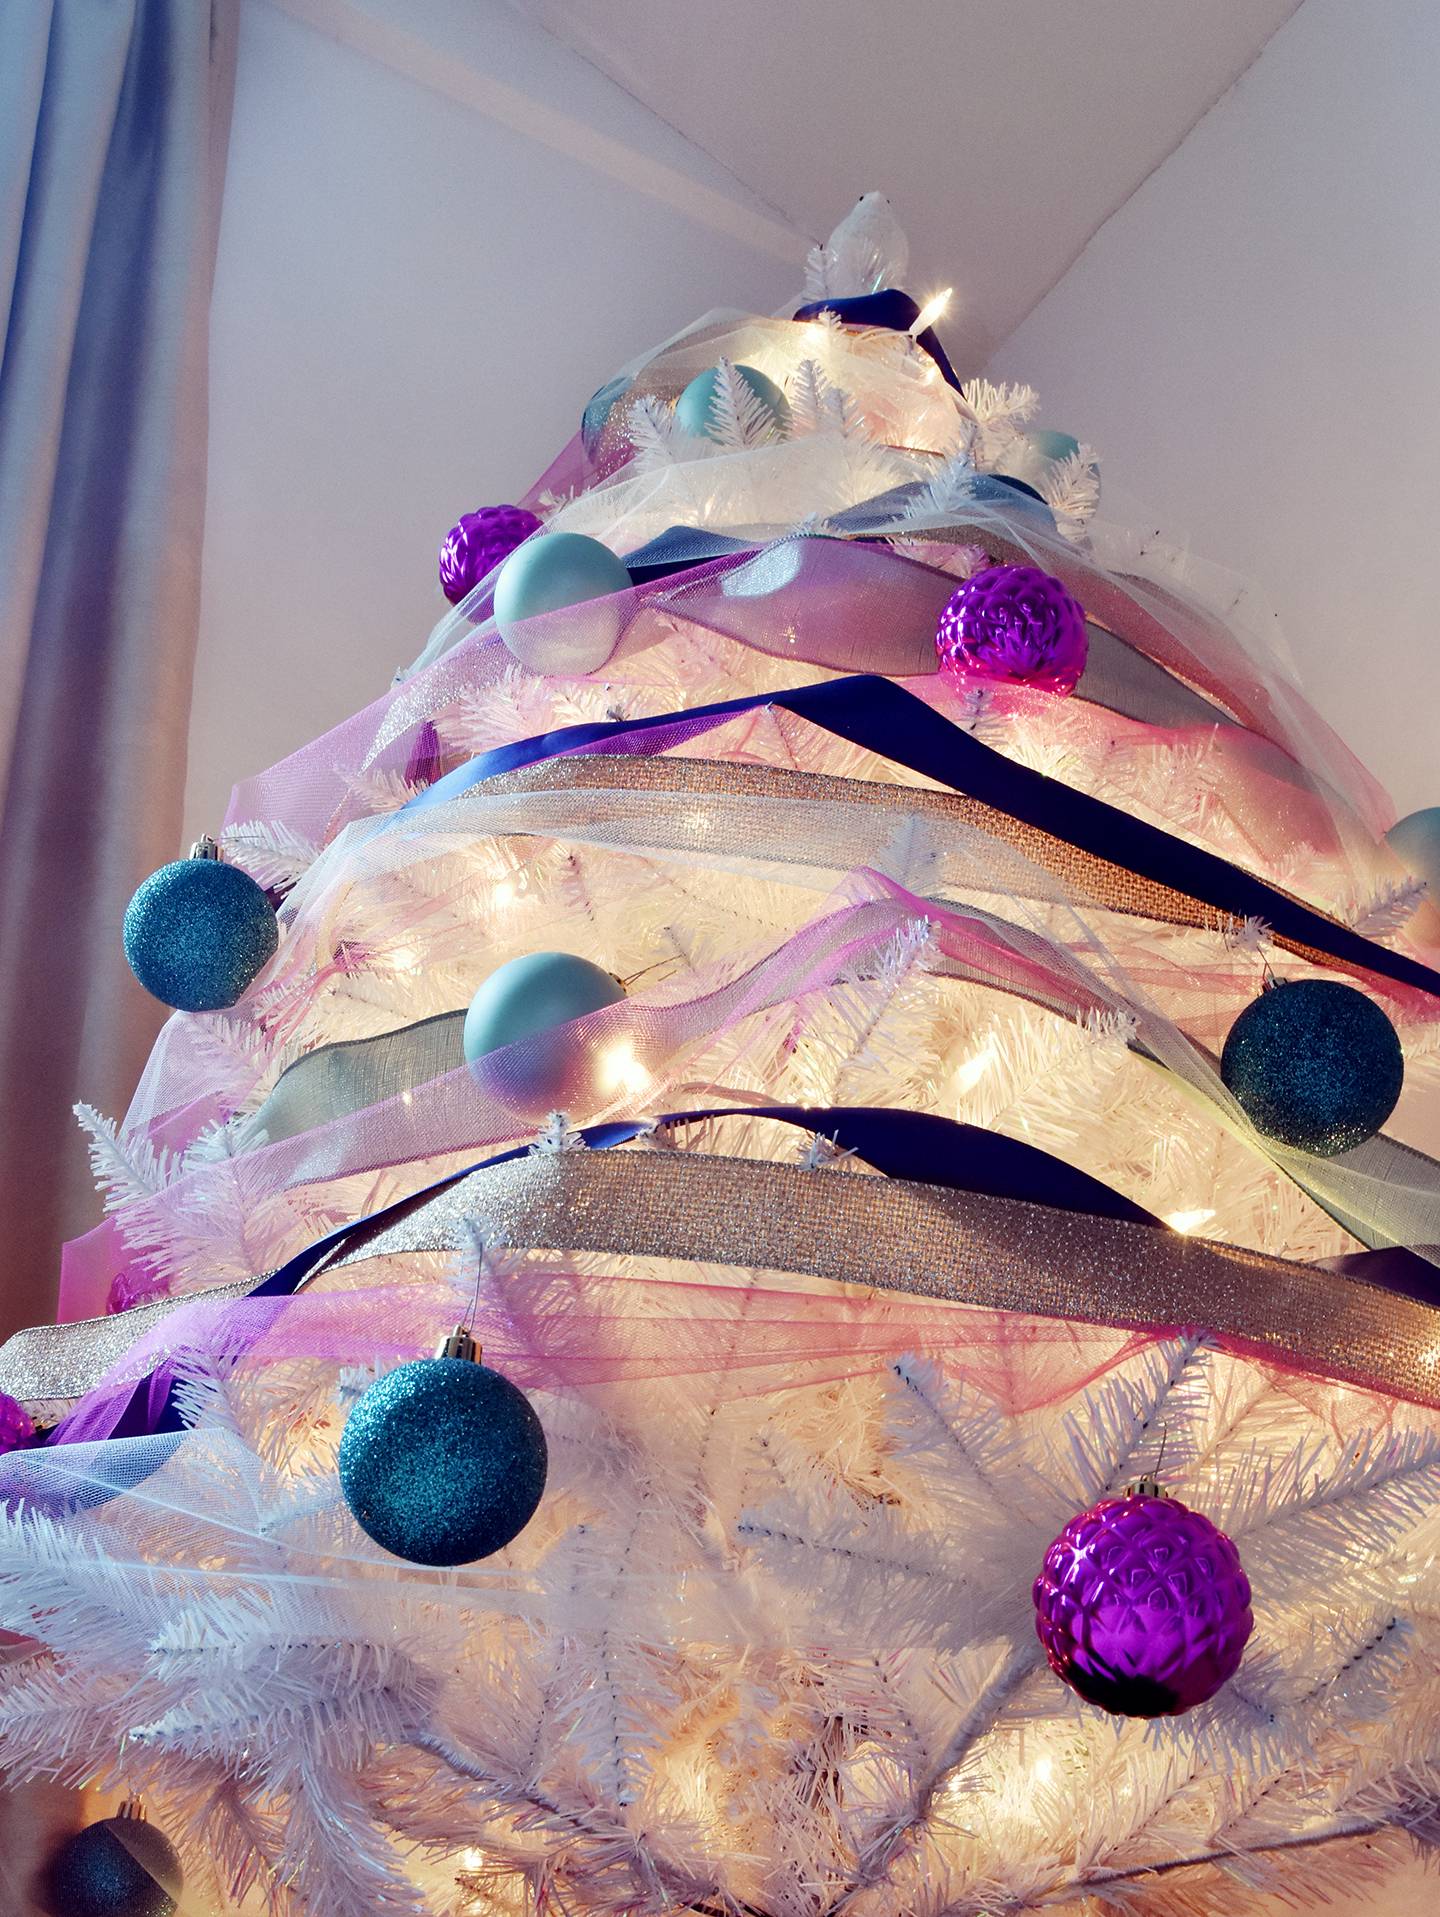 How To Decorate A Christmas Tree With Ribbon | Curbly #christmas #holiday #ribbon #nontraditional #unique